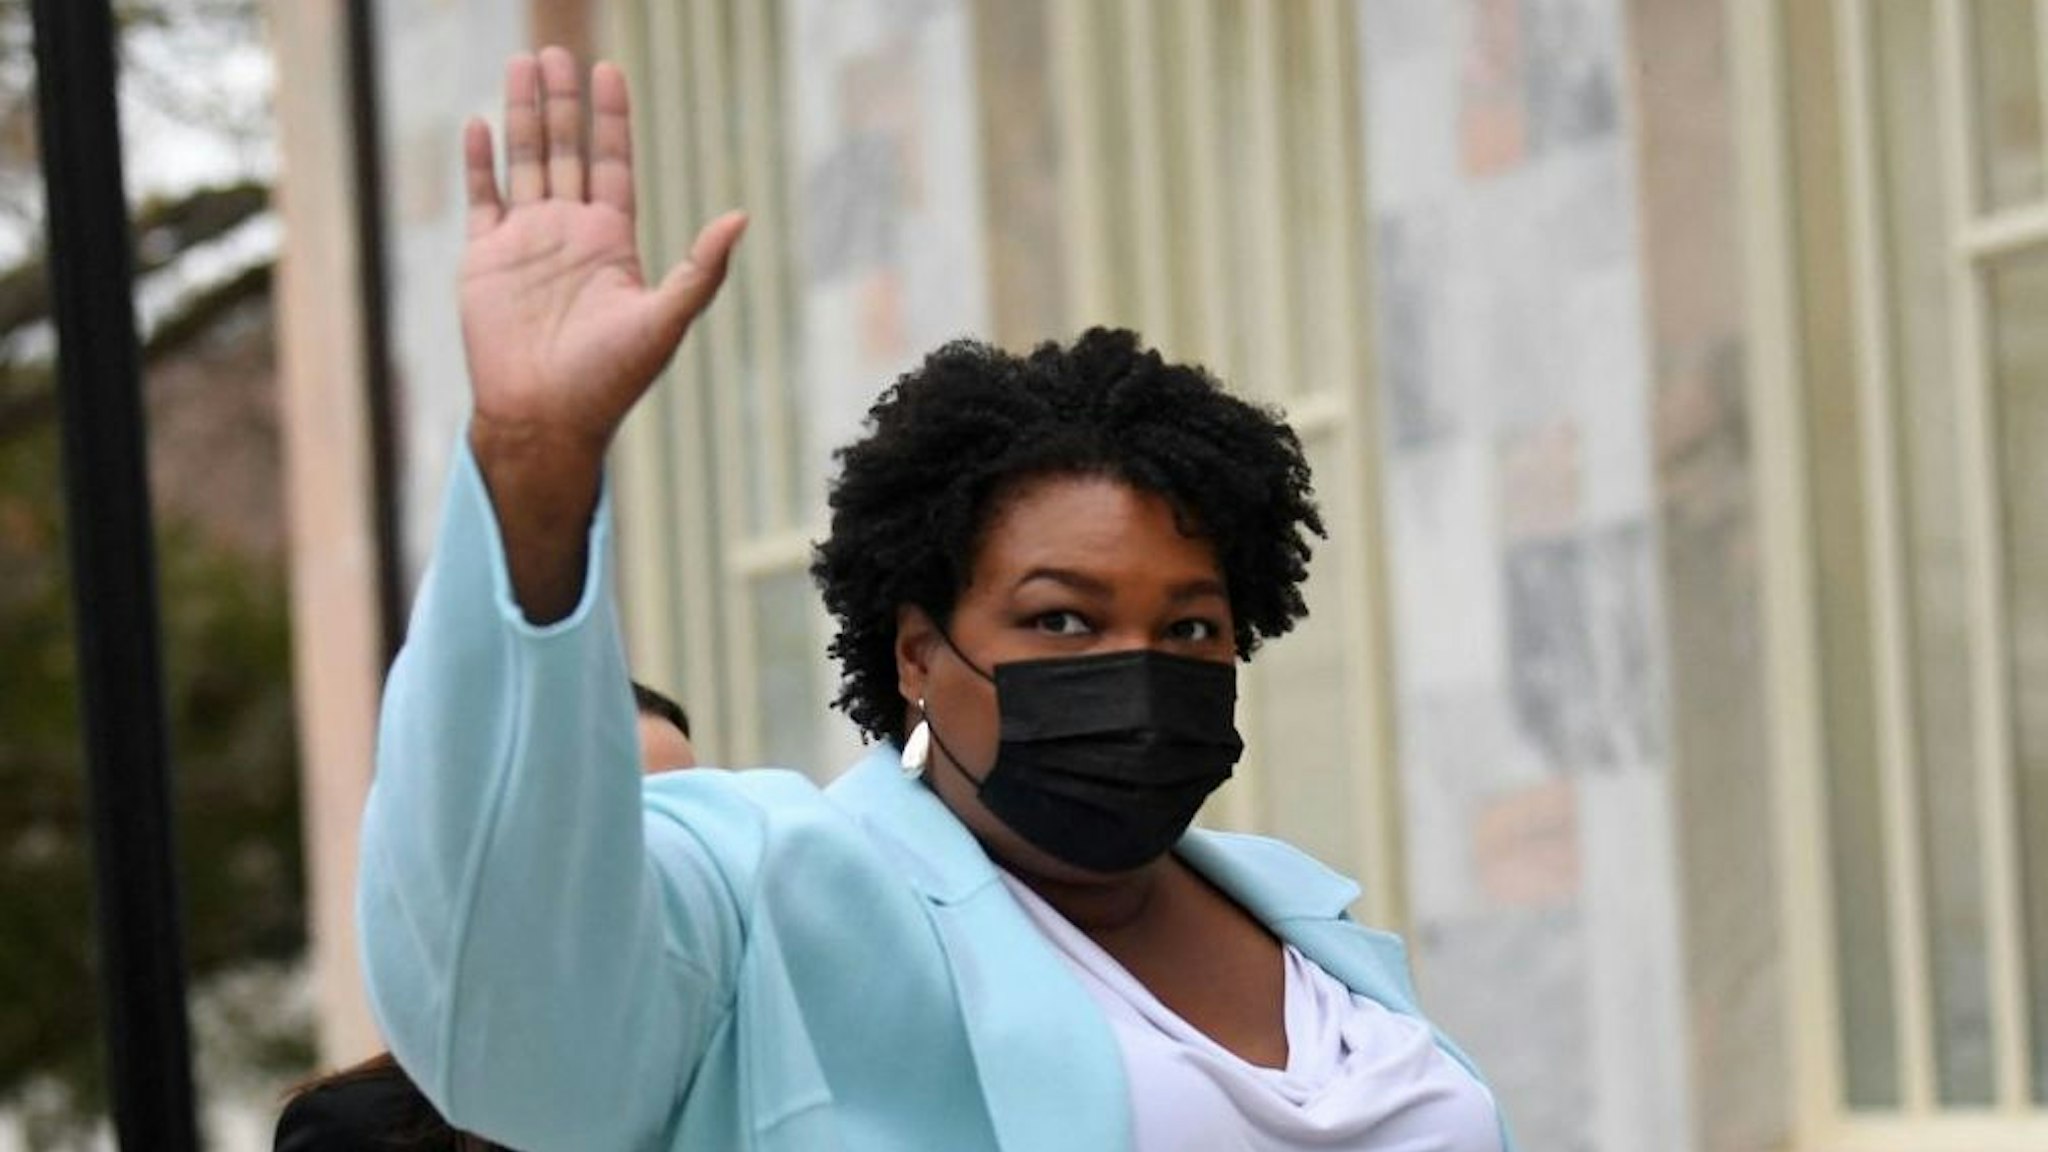 US politician and voting rights activist Stacey Abrams arrives to meet with US President Joe Biden at Emory University in Atlanta, Georgia on March 19, 2021.